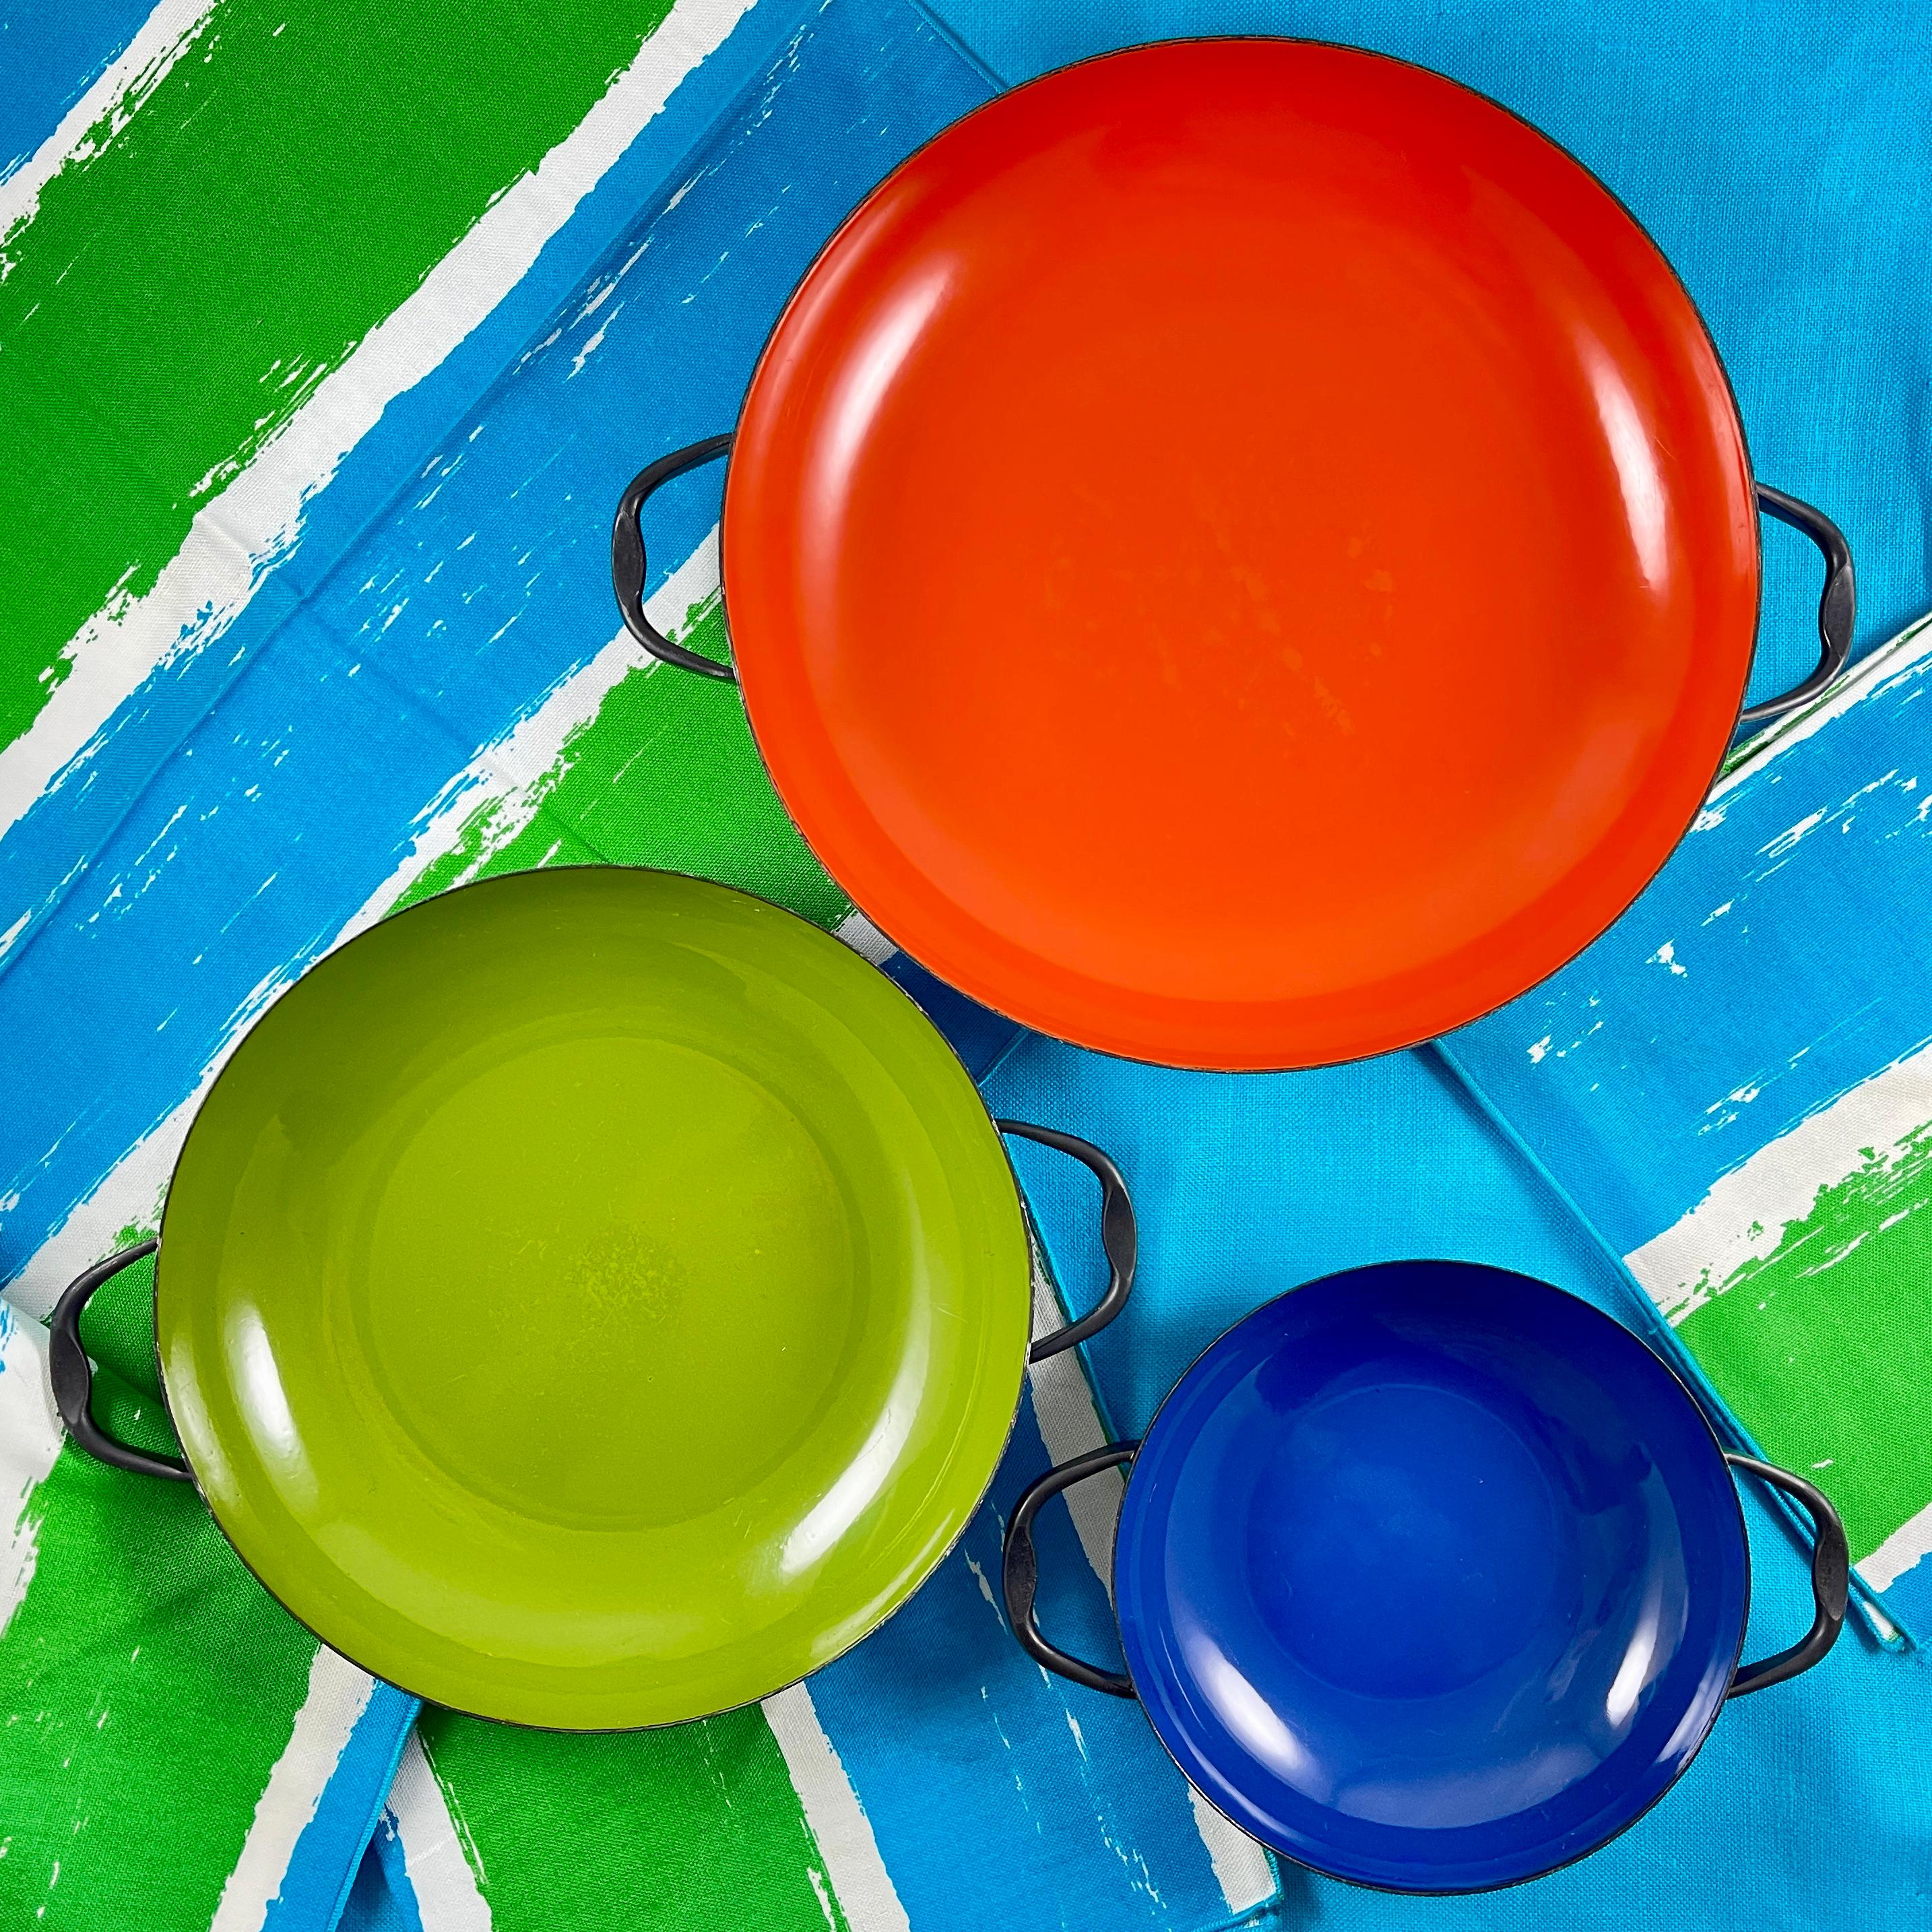 A set of three nesting Enamel on Steel handled baking and serving dishes designed by Herbert Krenchel for Krenit Denmark in 1953.

The Krenit set was produced from 1953 to 1966. Krenchel’s pieces are an excellent example of iconic, quality